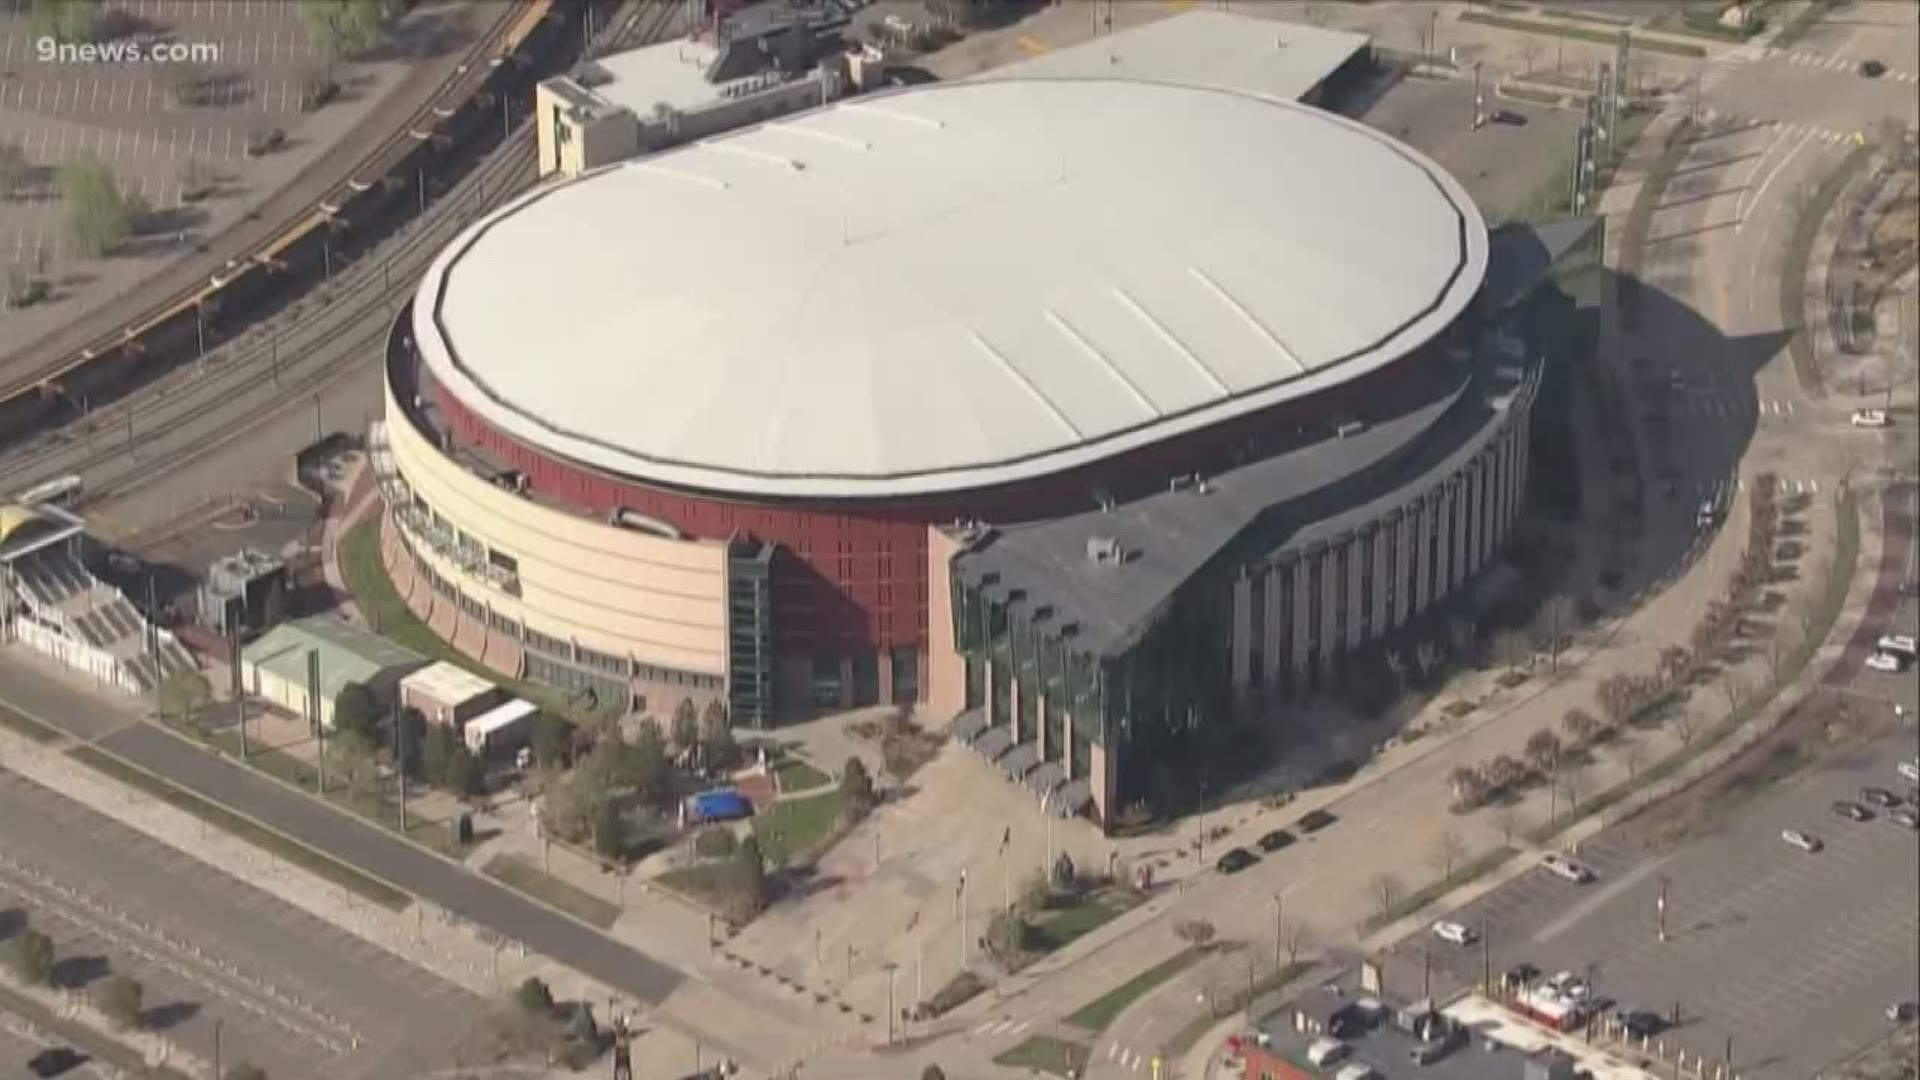 One of Denver's biggest arenas turns 20 today.